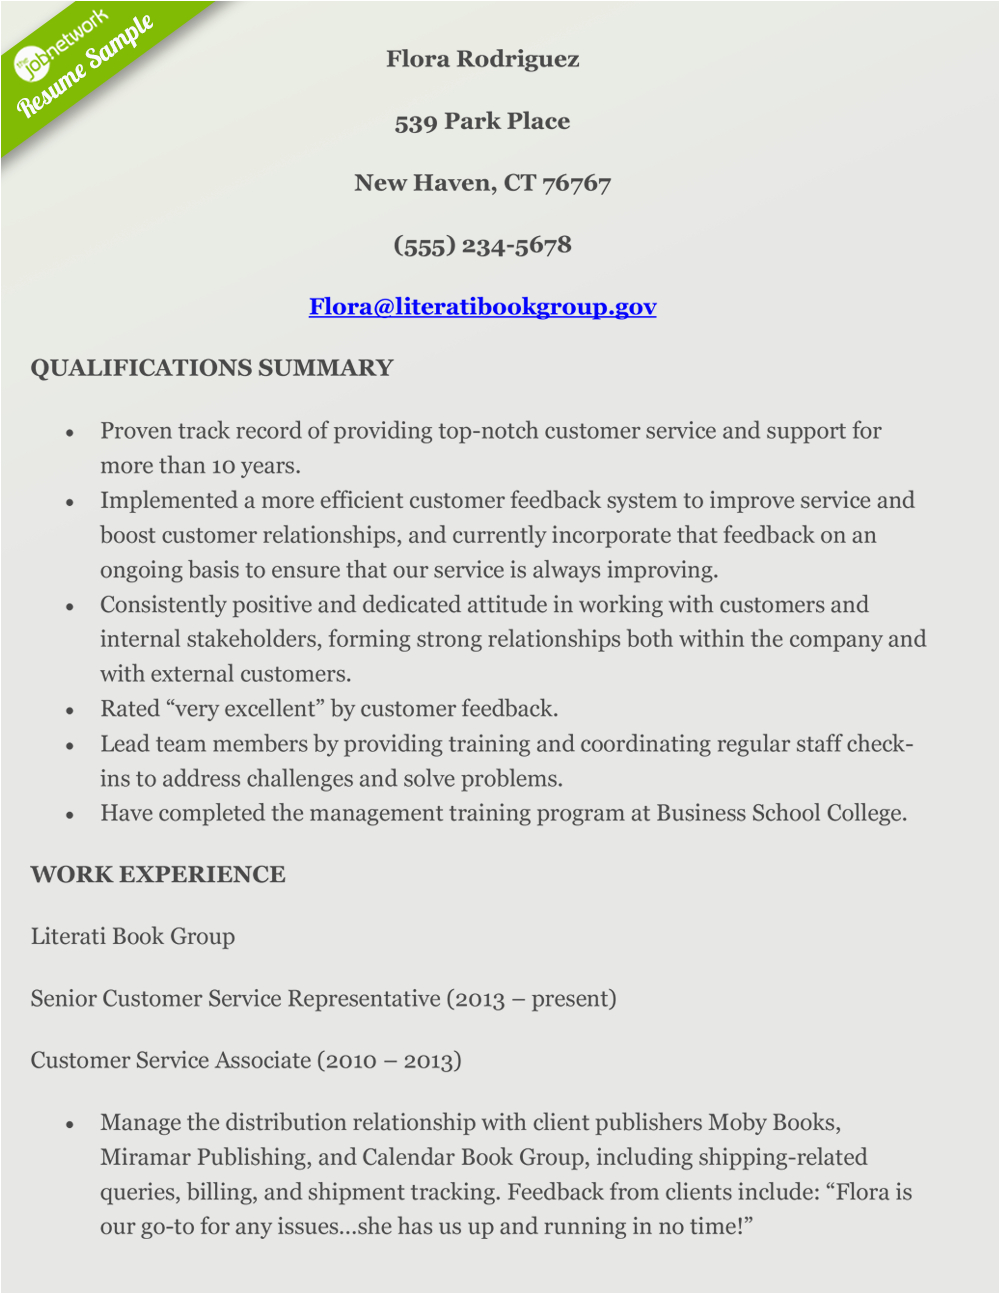 Sample Customer Service Resume Summary Qualifications How to Craft A Perfect Customer Service Resume Using Examples